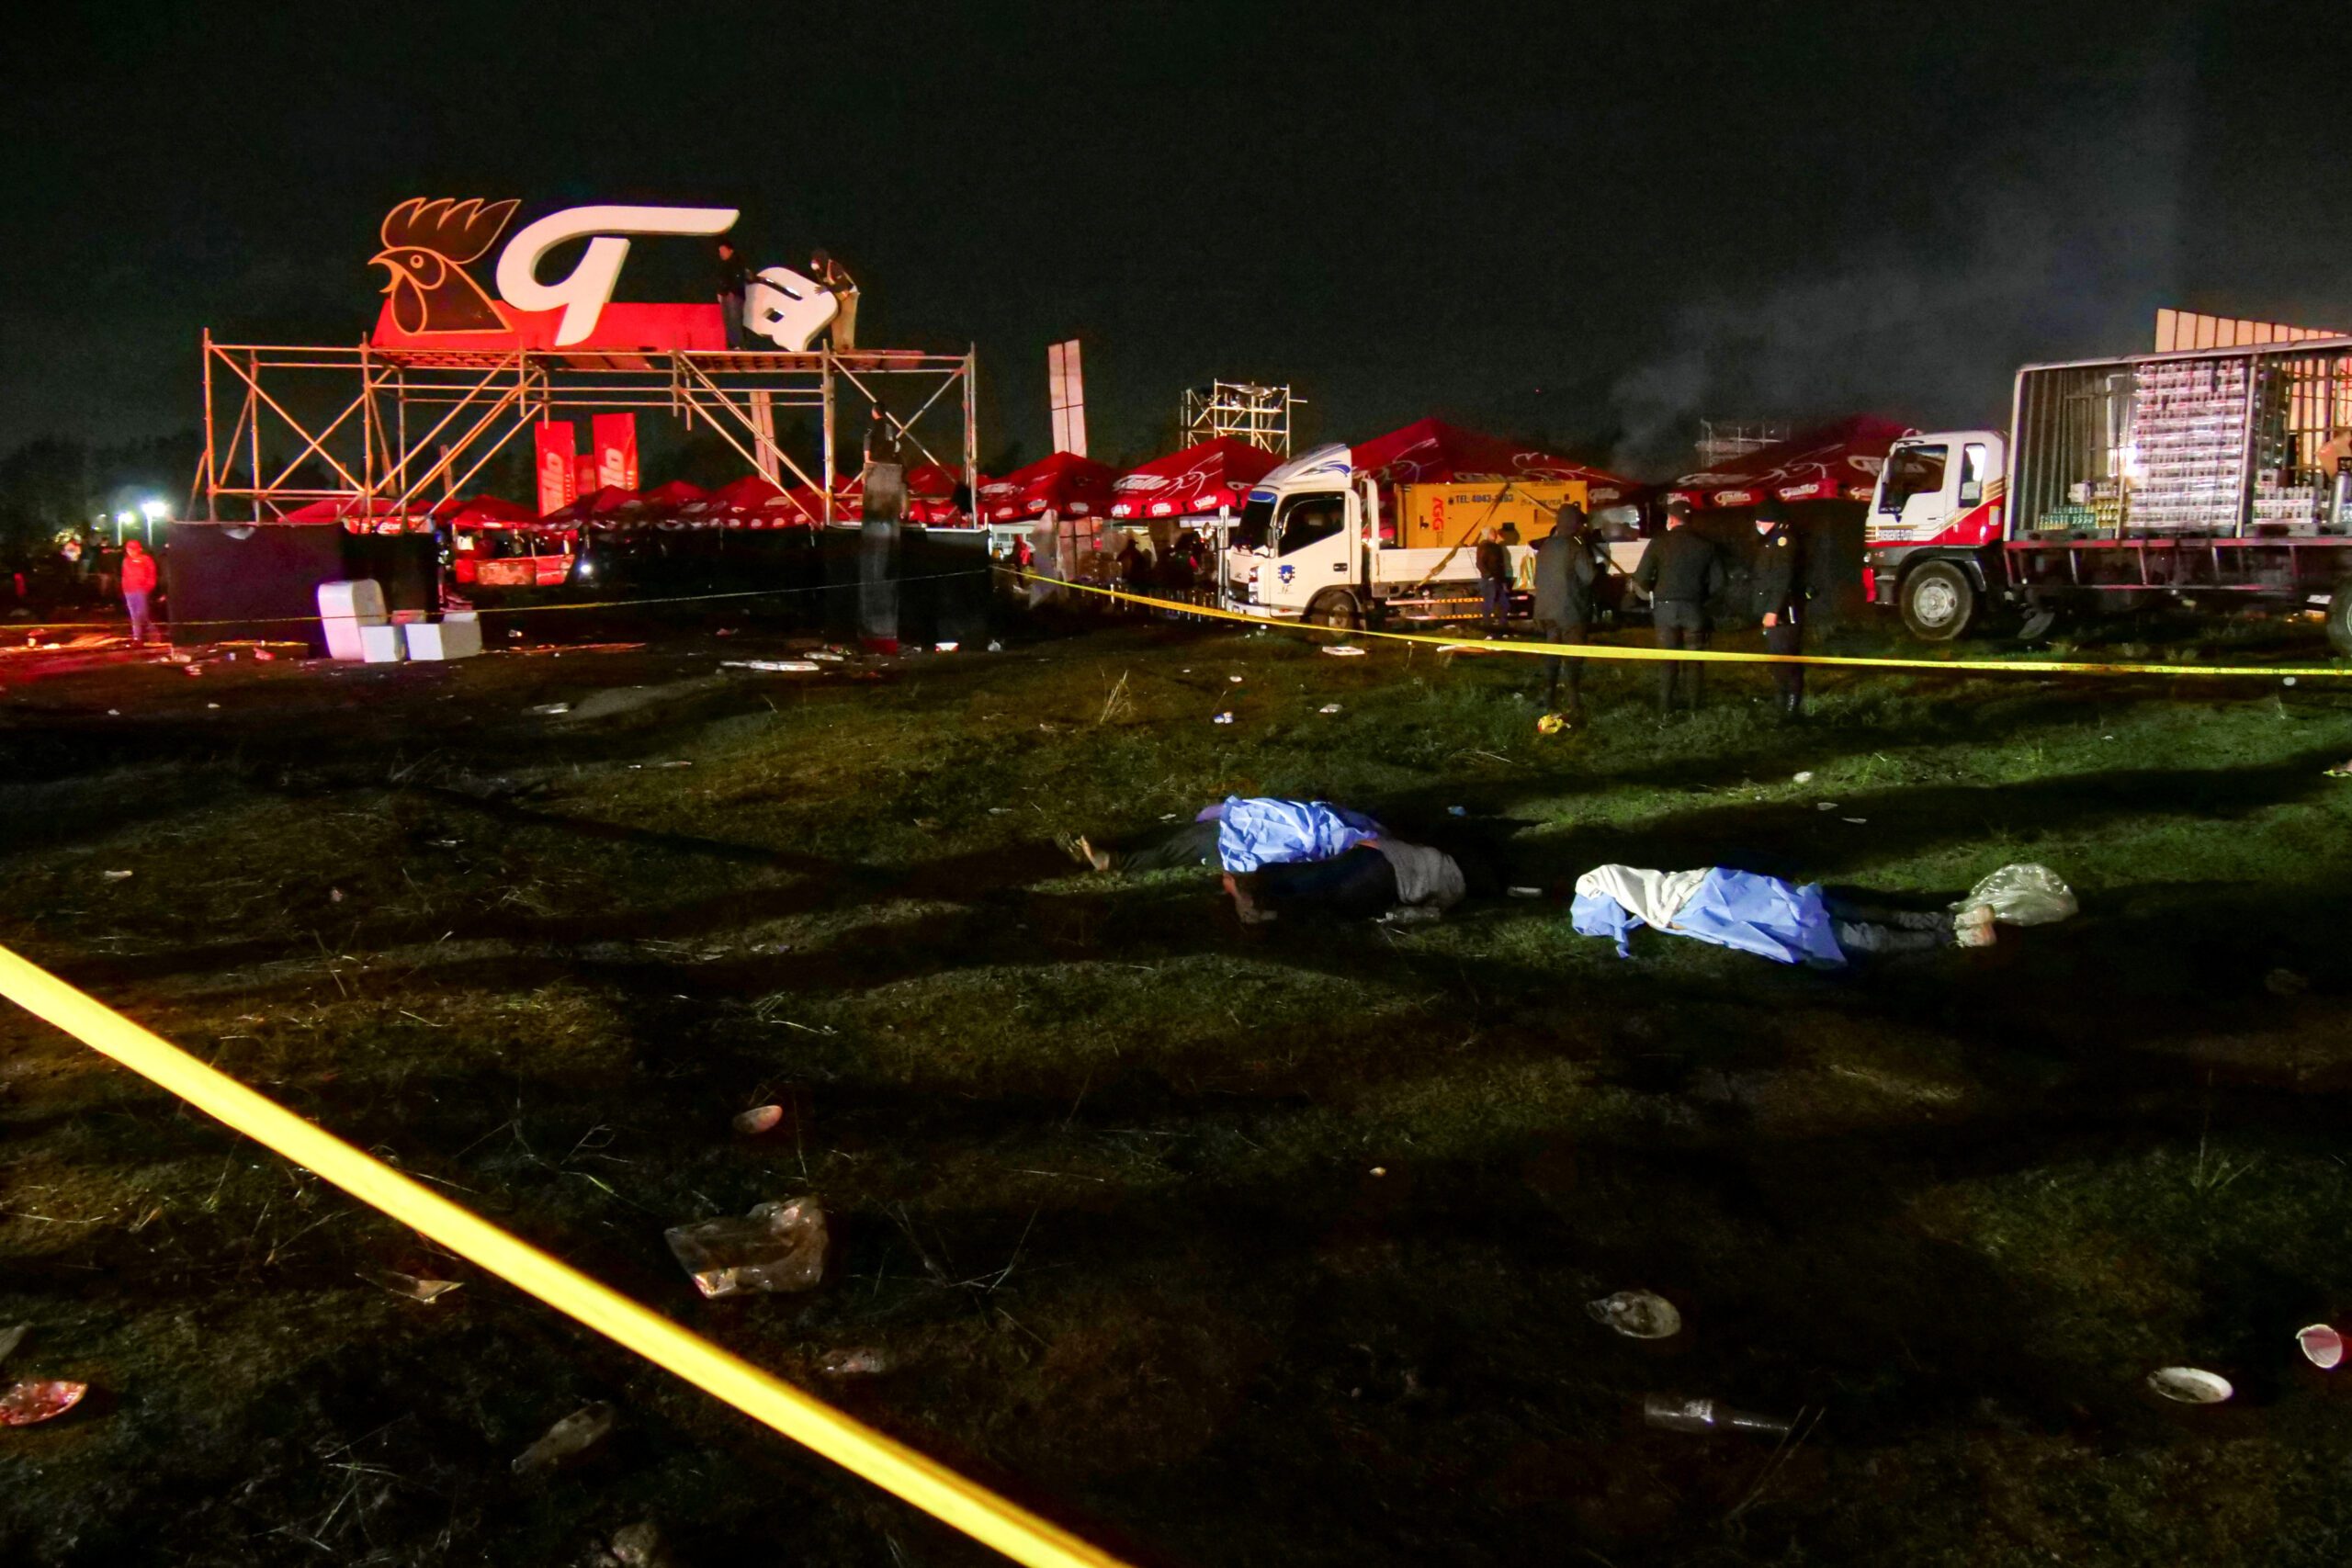 Stampede at music festival kills at least 9 people, including 2 children